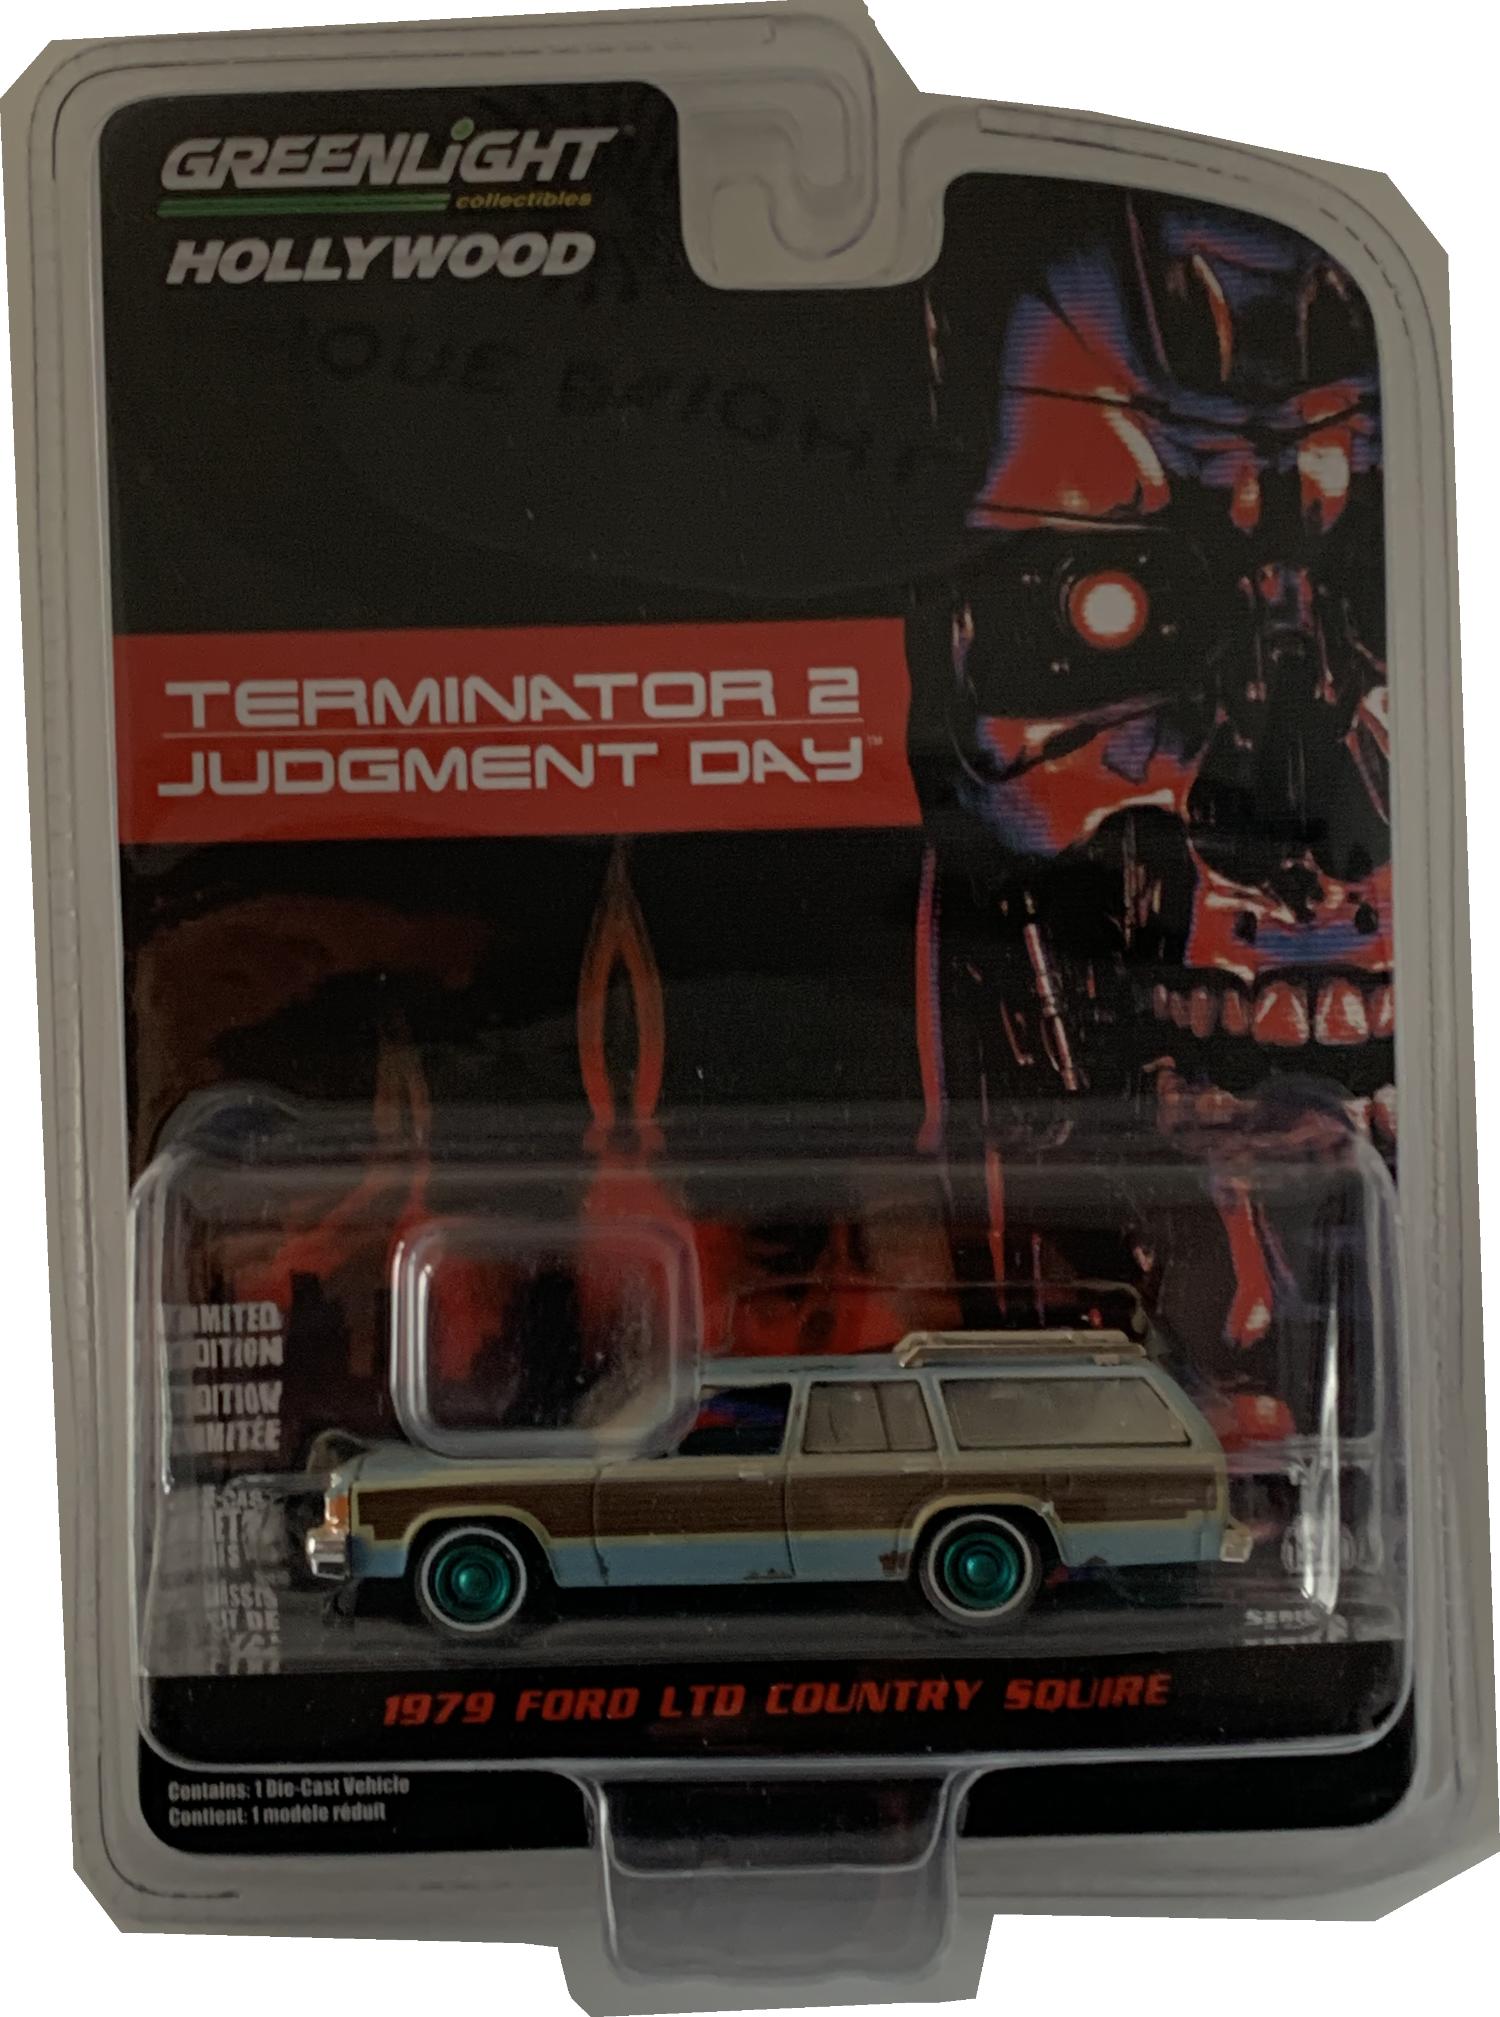 Terminator 2 Judgment Day 1979 Ford Ltd Country Squire 1:64 scale model from Greenlight, limited edition model, with GREEN WHEELS